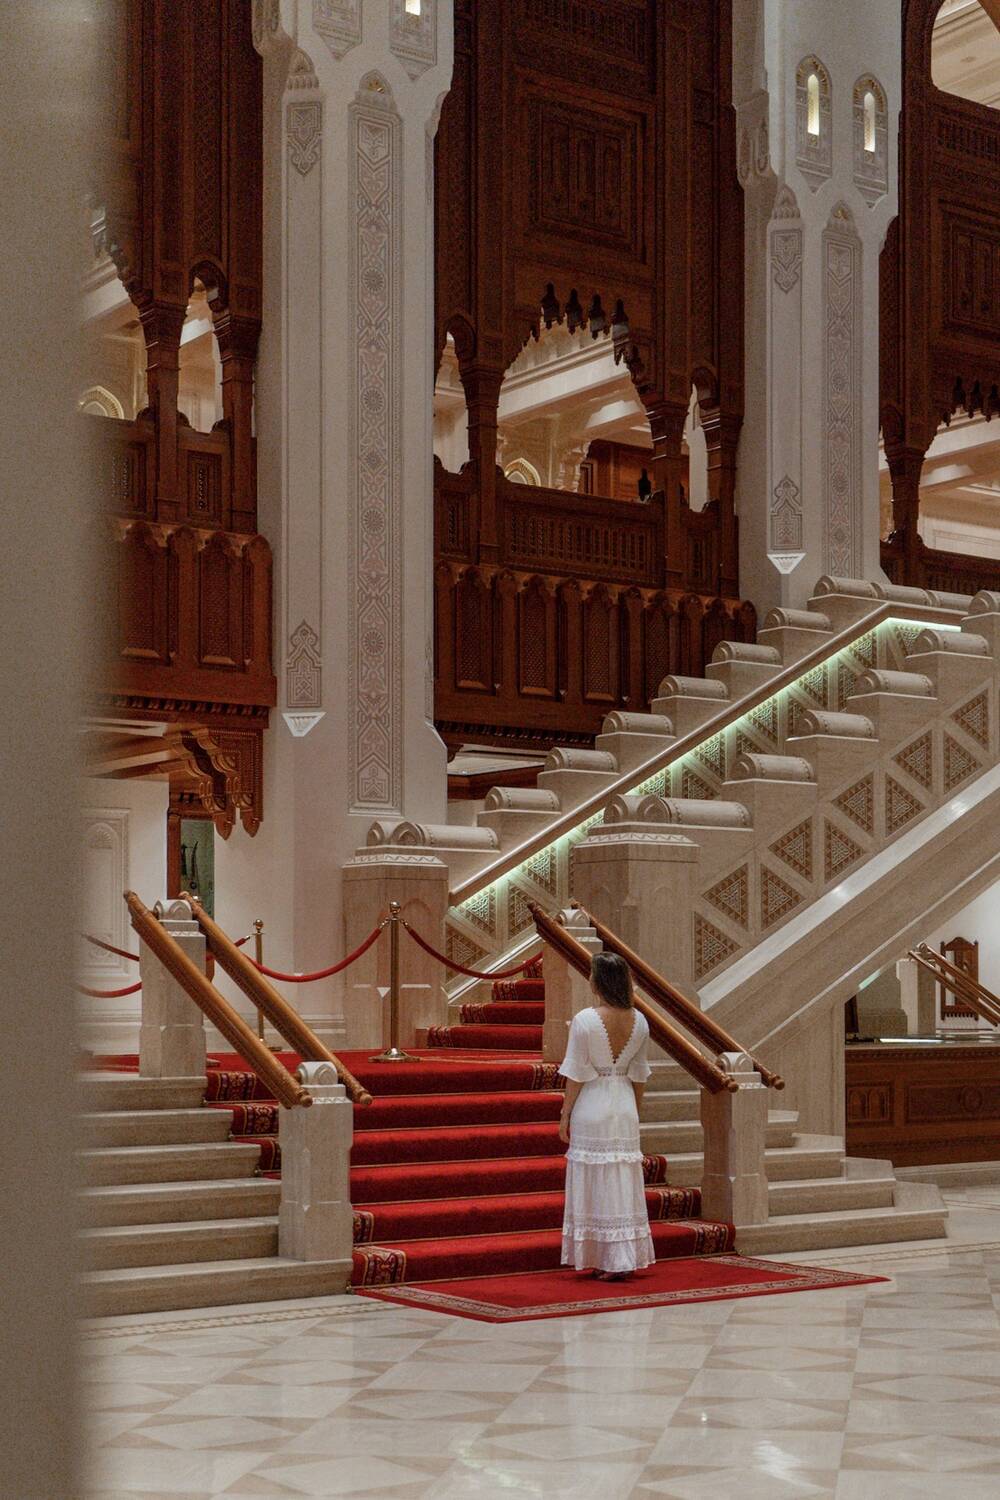 Royal Opera House in Muscat